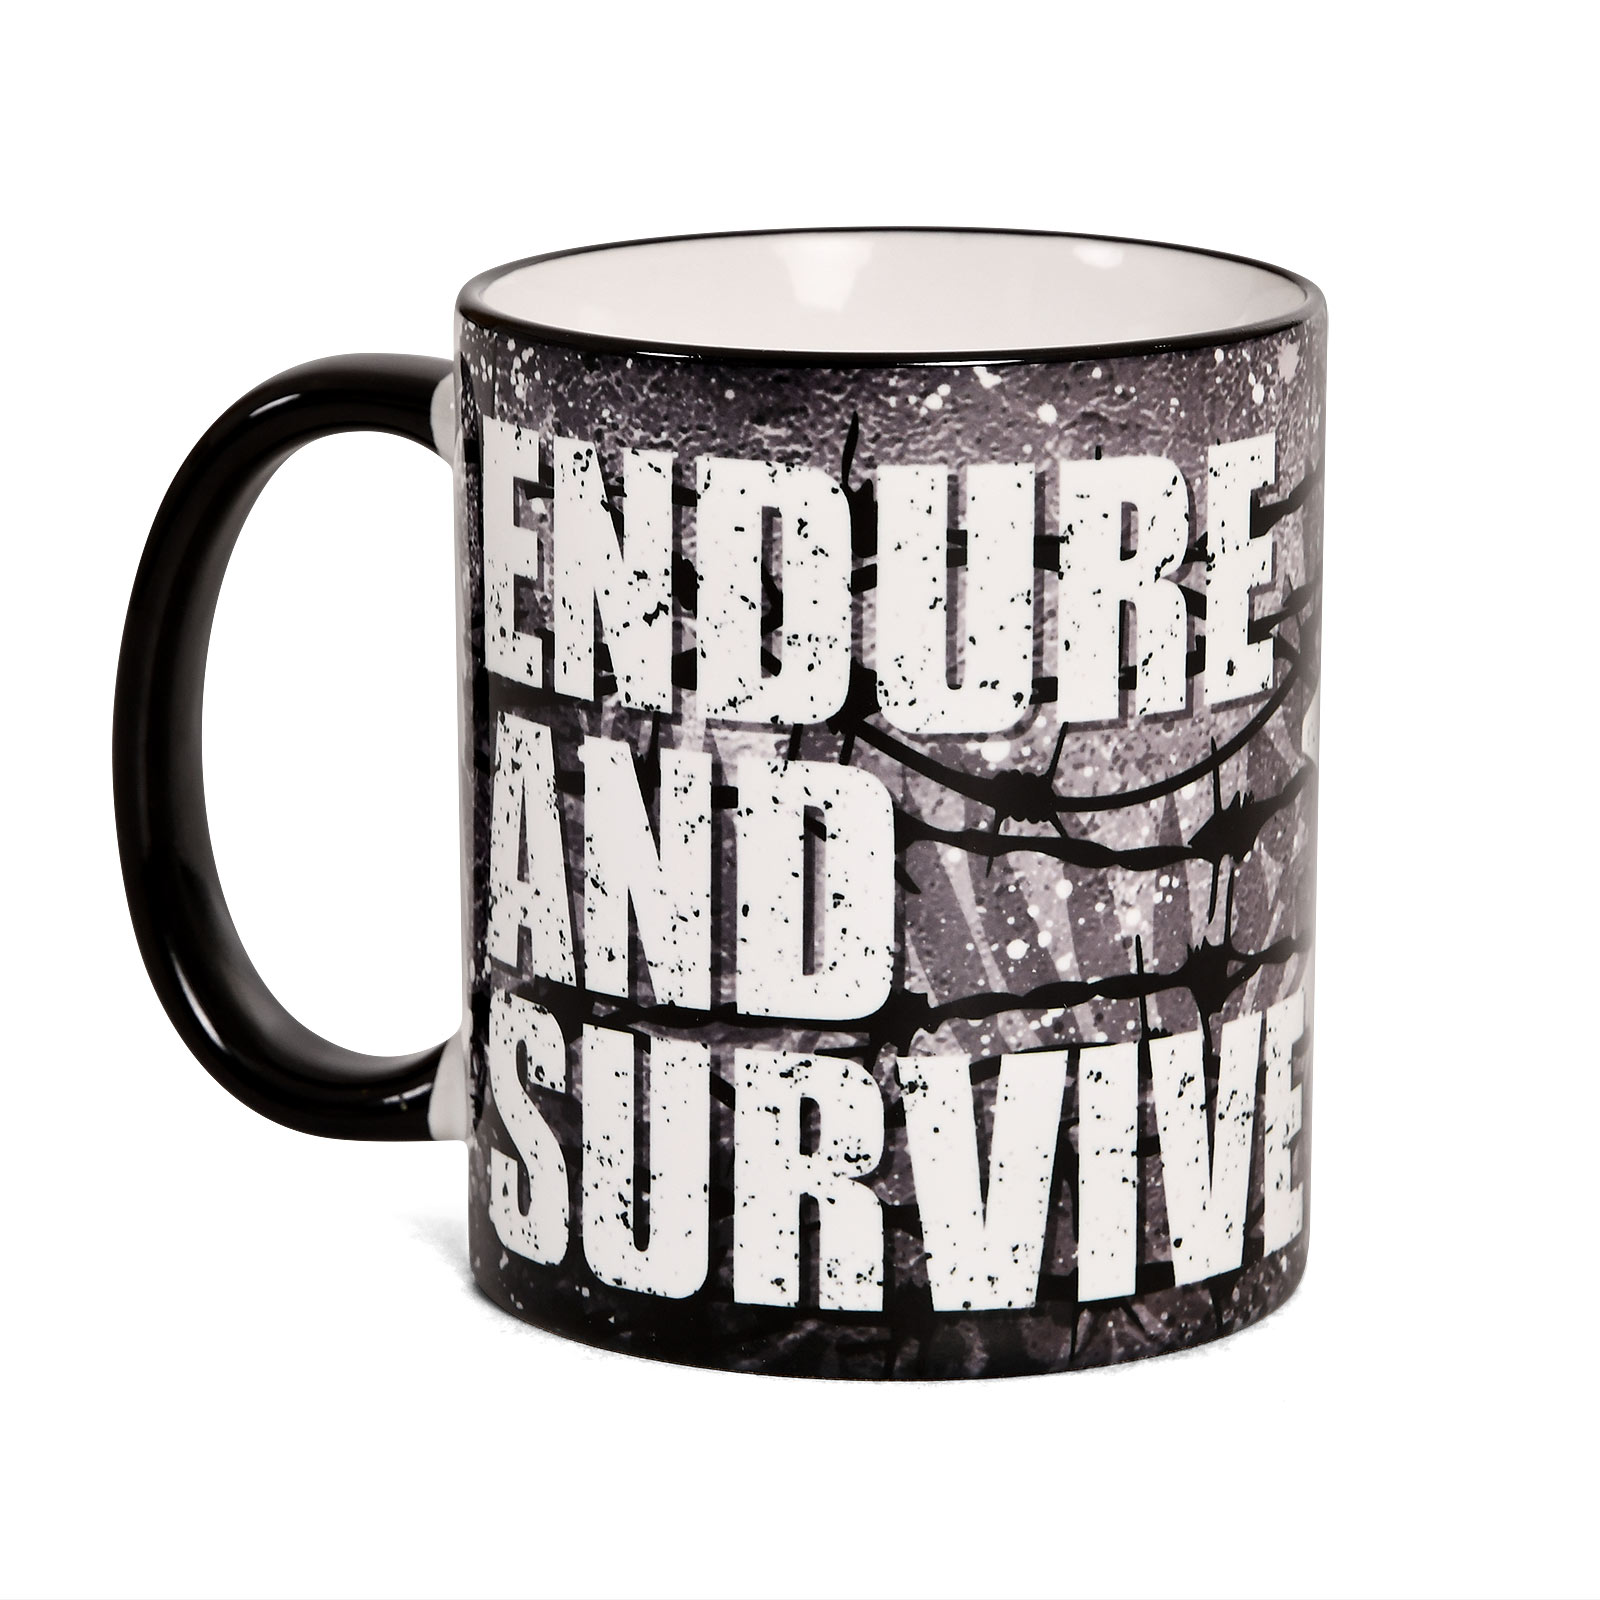 Endure and Survive Mug for The Last of Us Fans